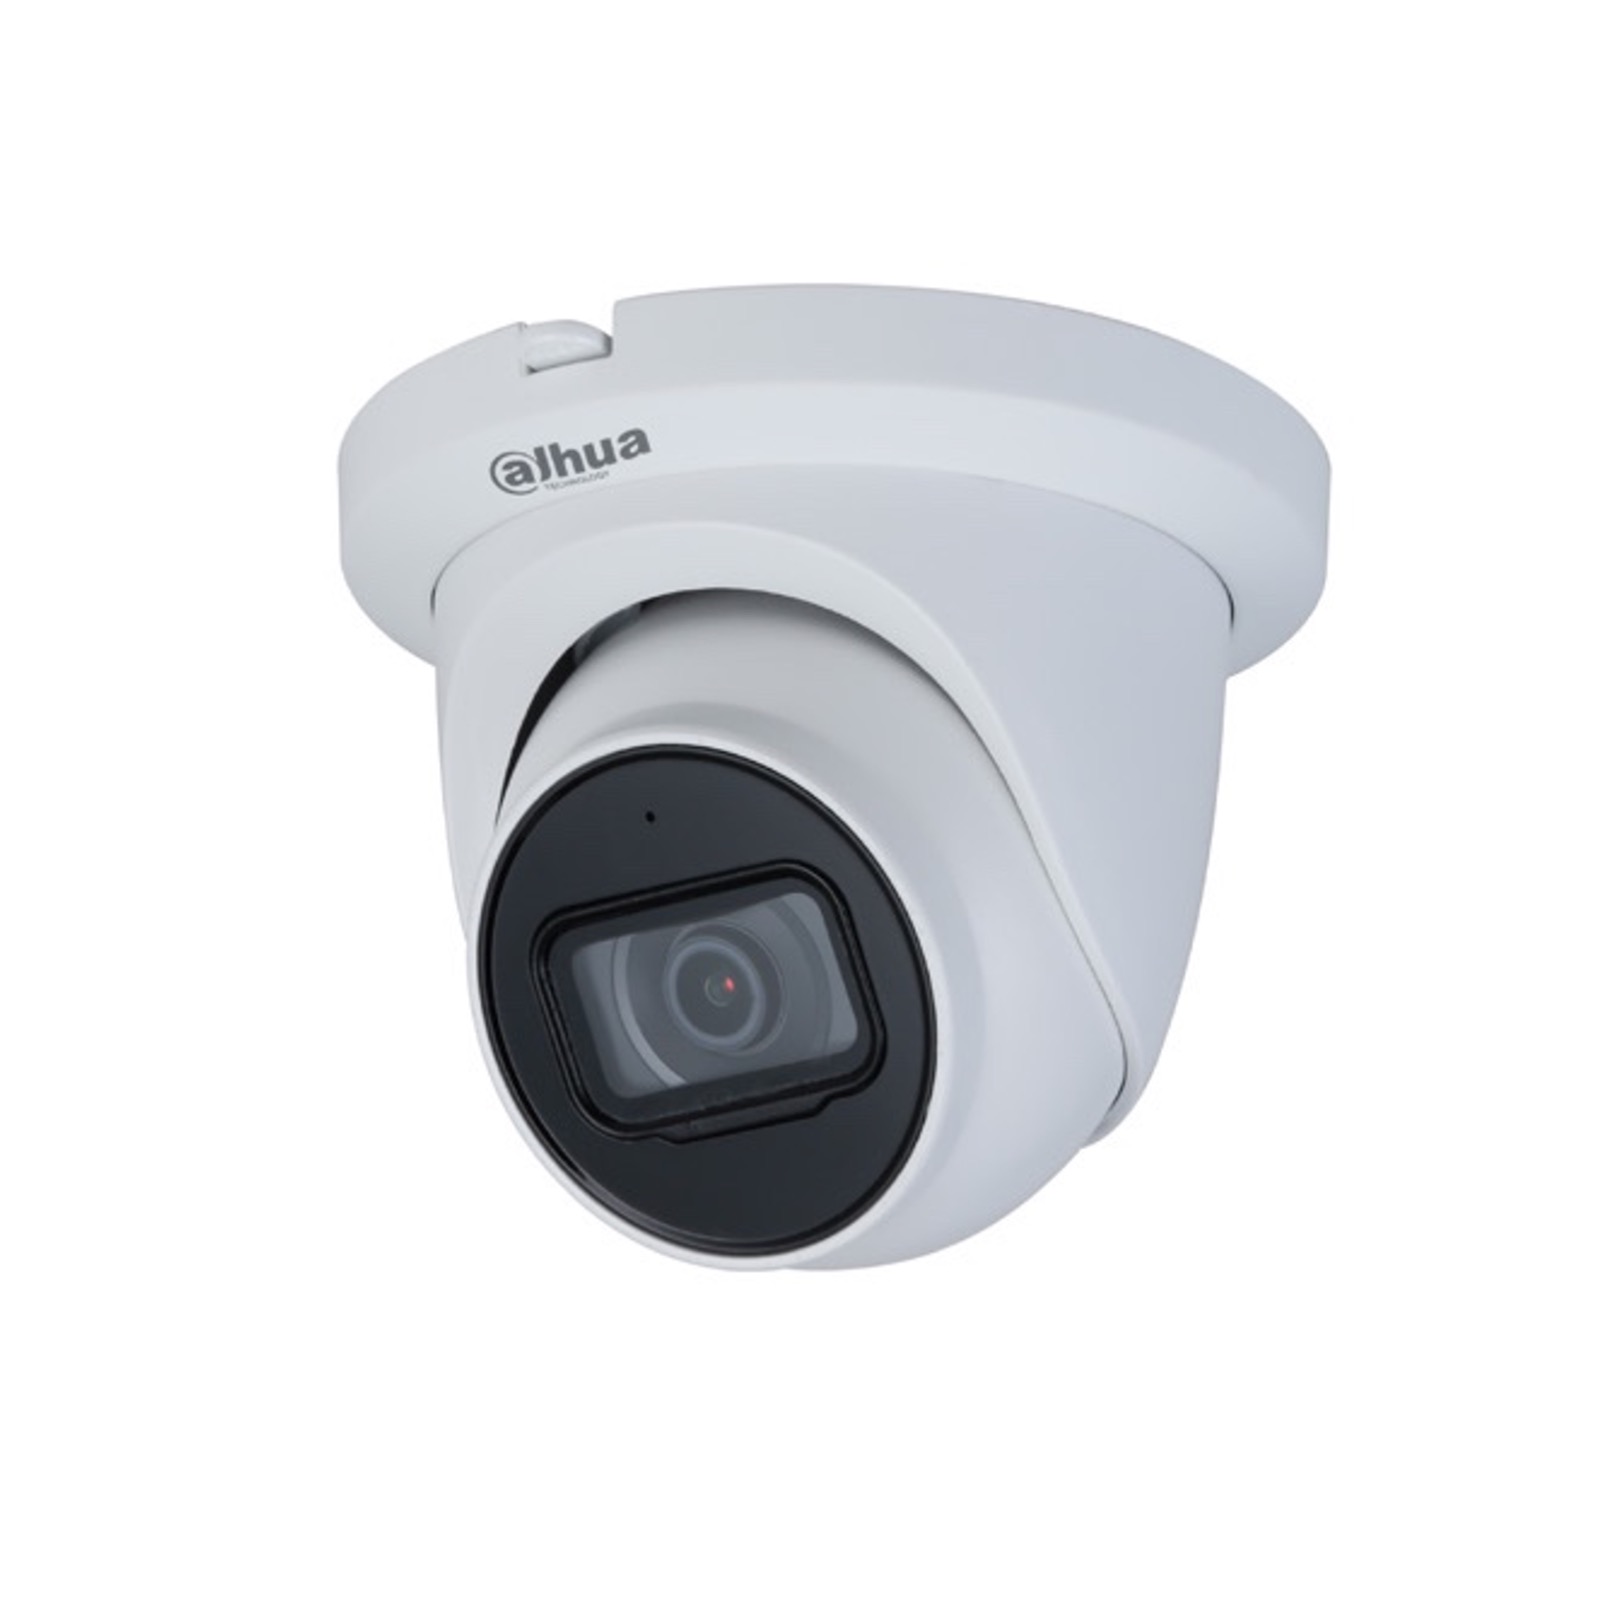 DAHUA-2851 | Dahua 4 in 1 PRO series fixed dome with Smart IR of 60 m for outdoor use. CMOS 1 / 2.7